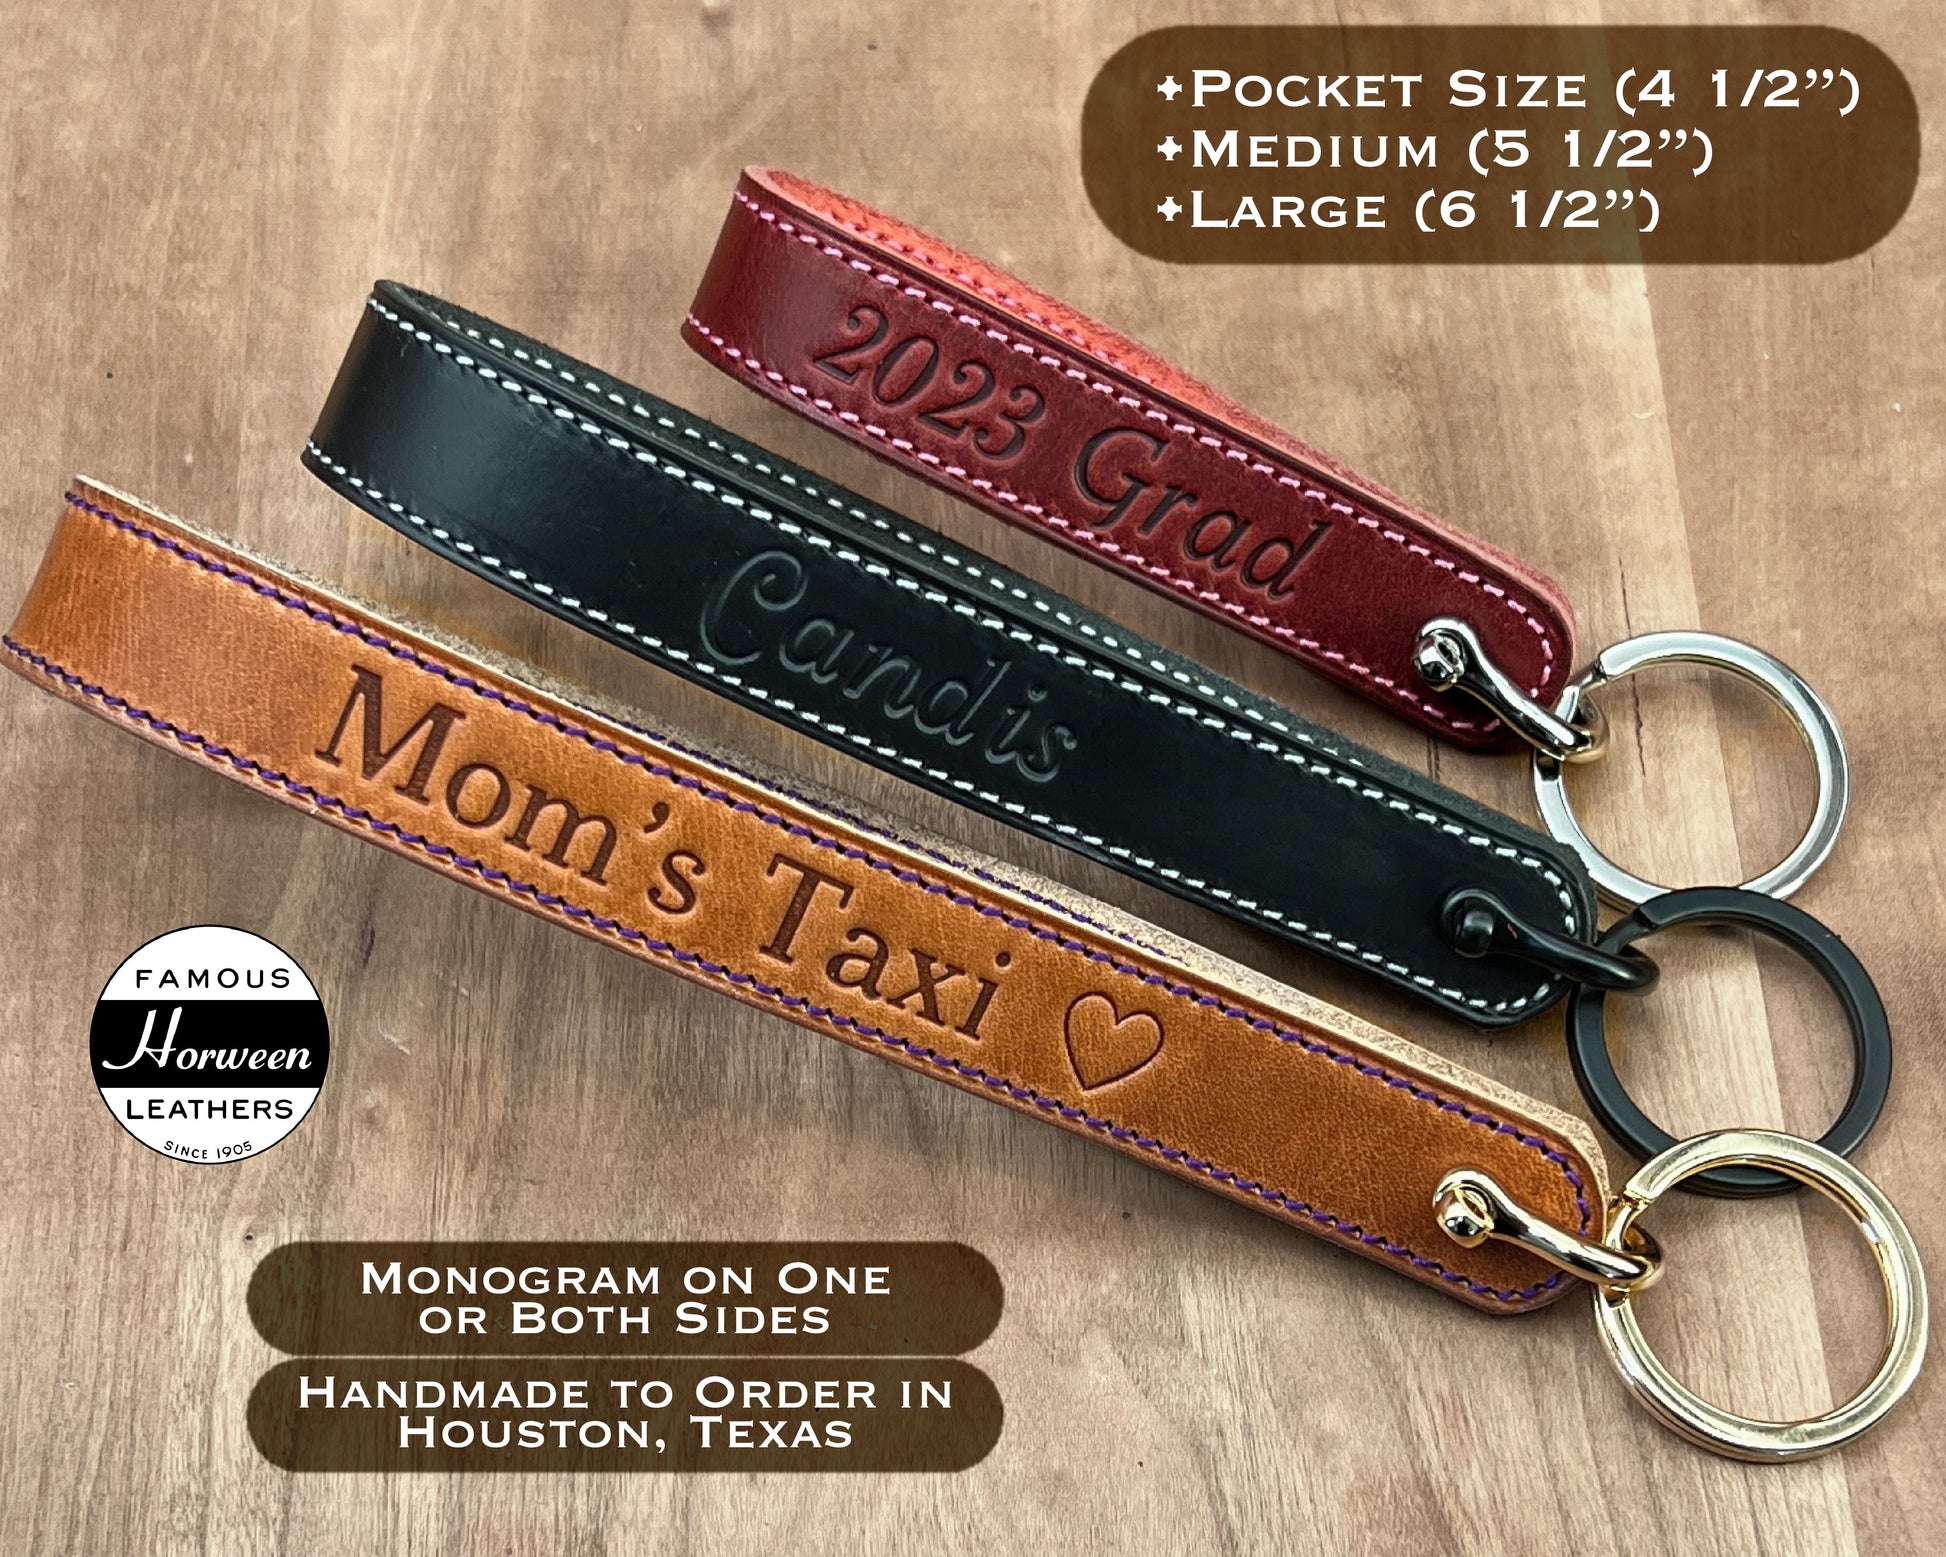 Custom Horween Leather Keychains in 3 sizes.